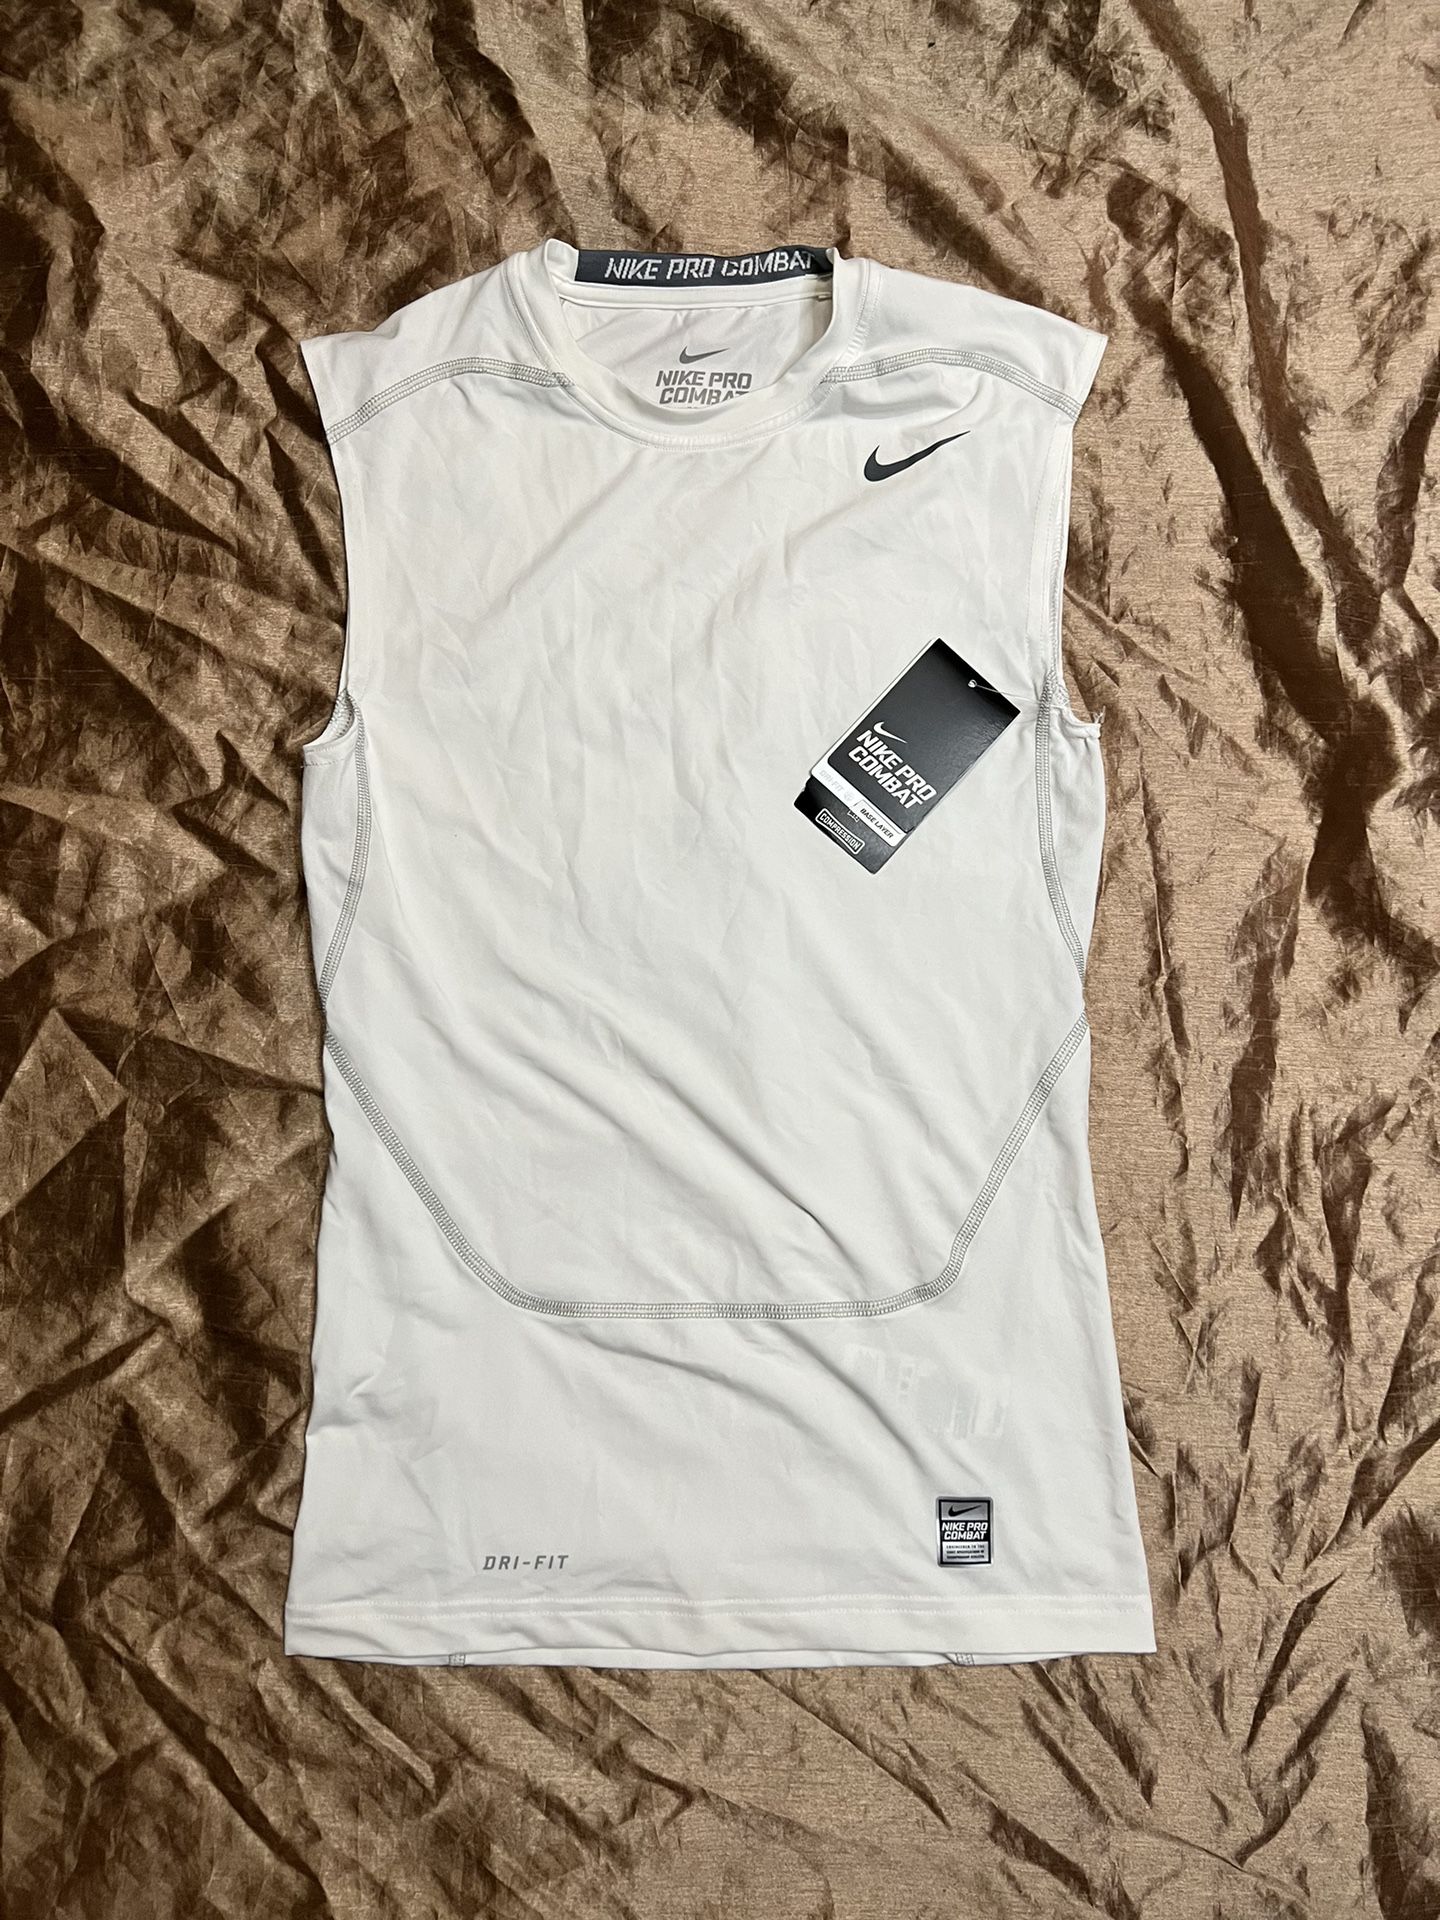 konsulent bænk jord Men's Medium NEW Nike Pro Combat Dri-Fit Compression white sleeveless  fitted shi for Sale in Artesia, CA - OfferUp